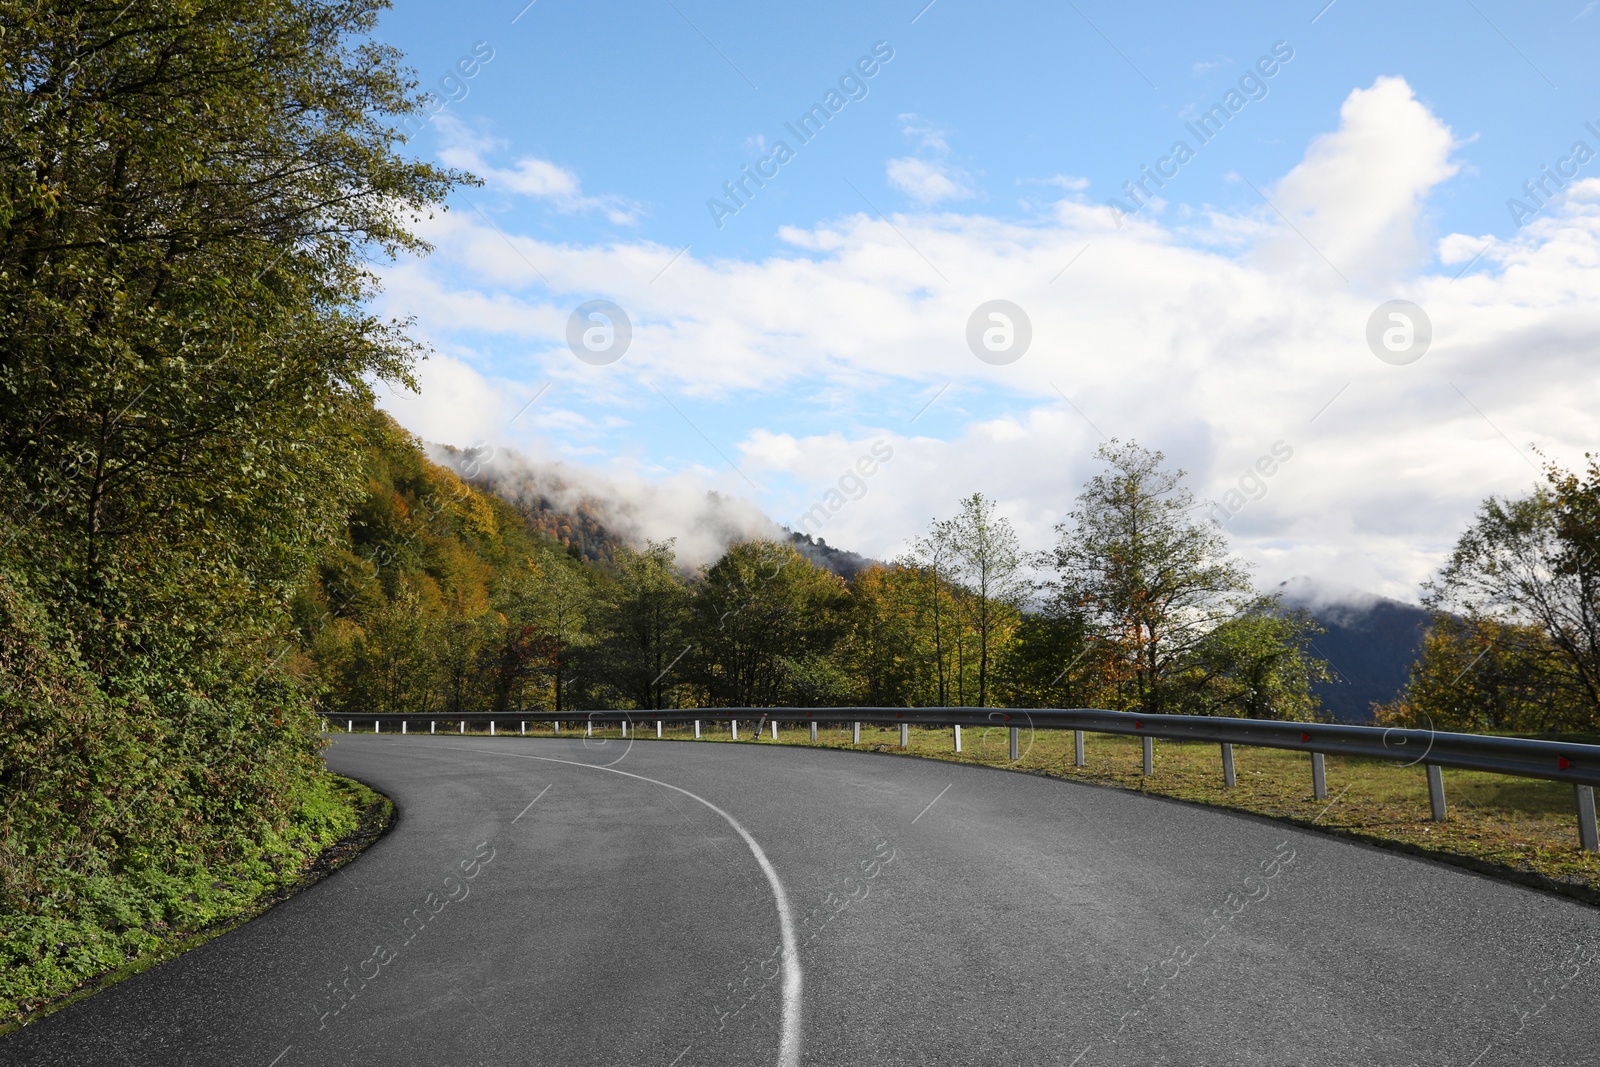 Photo of Picturesque view of empty road near trees in mountains